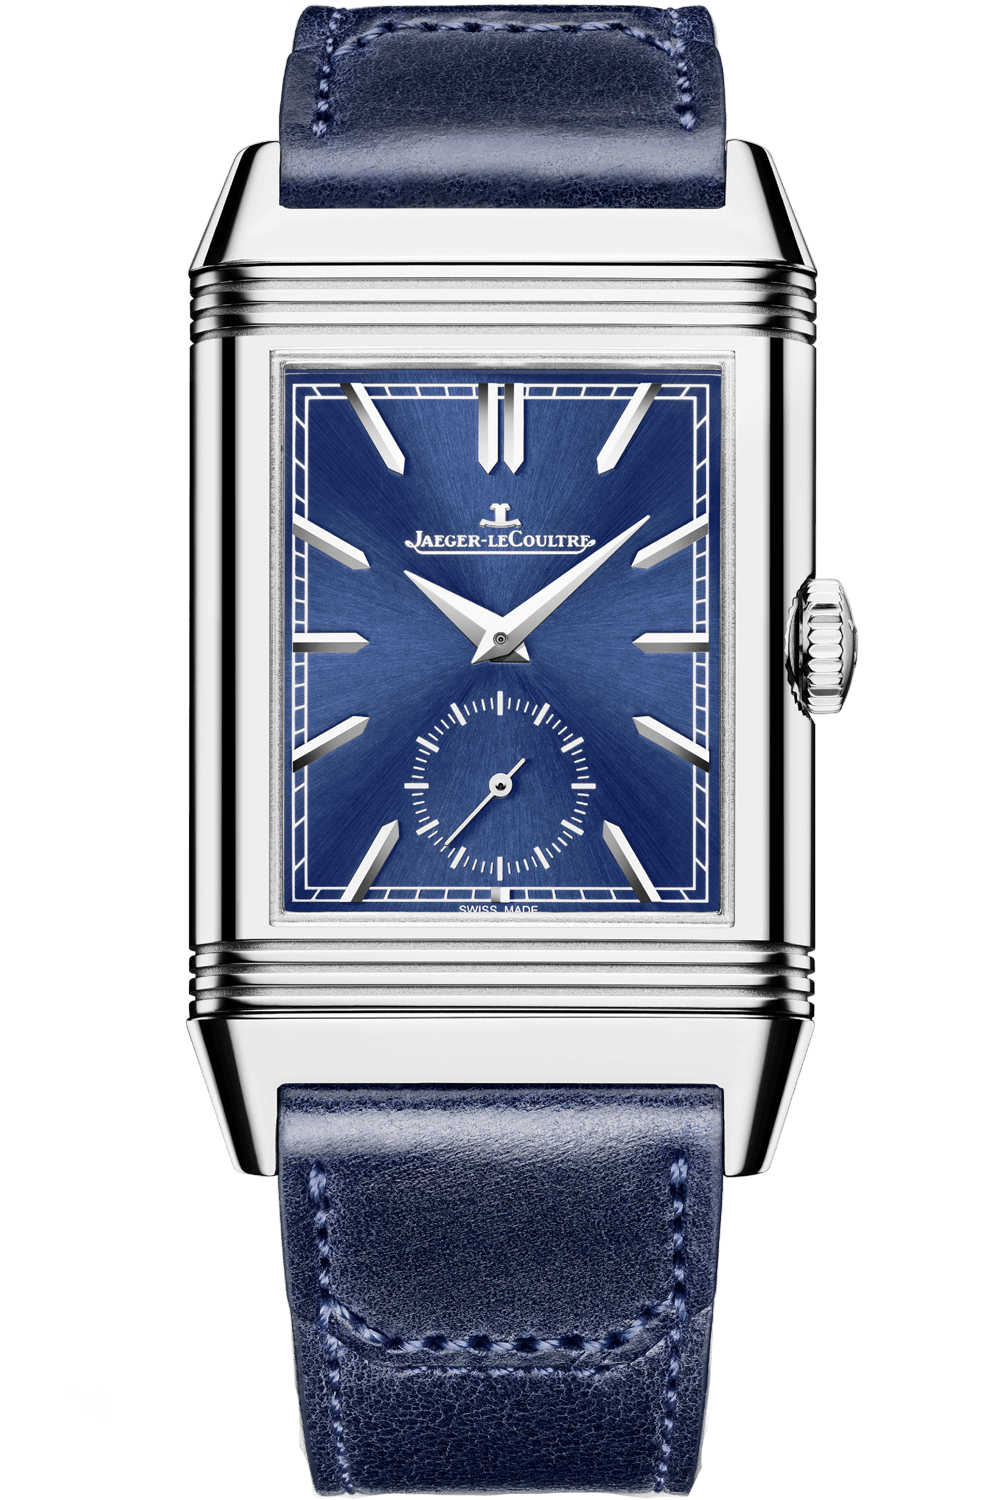 Jaeger-LeCoultre Reverso Classic Large Duoface, Q3838420 | lupon.gov.ph